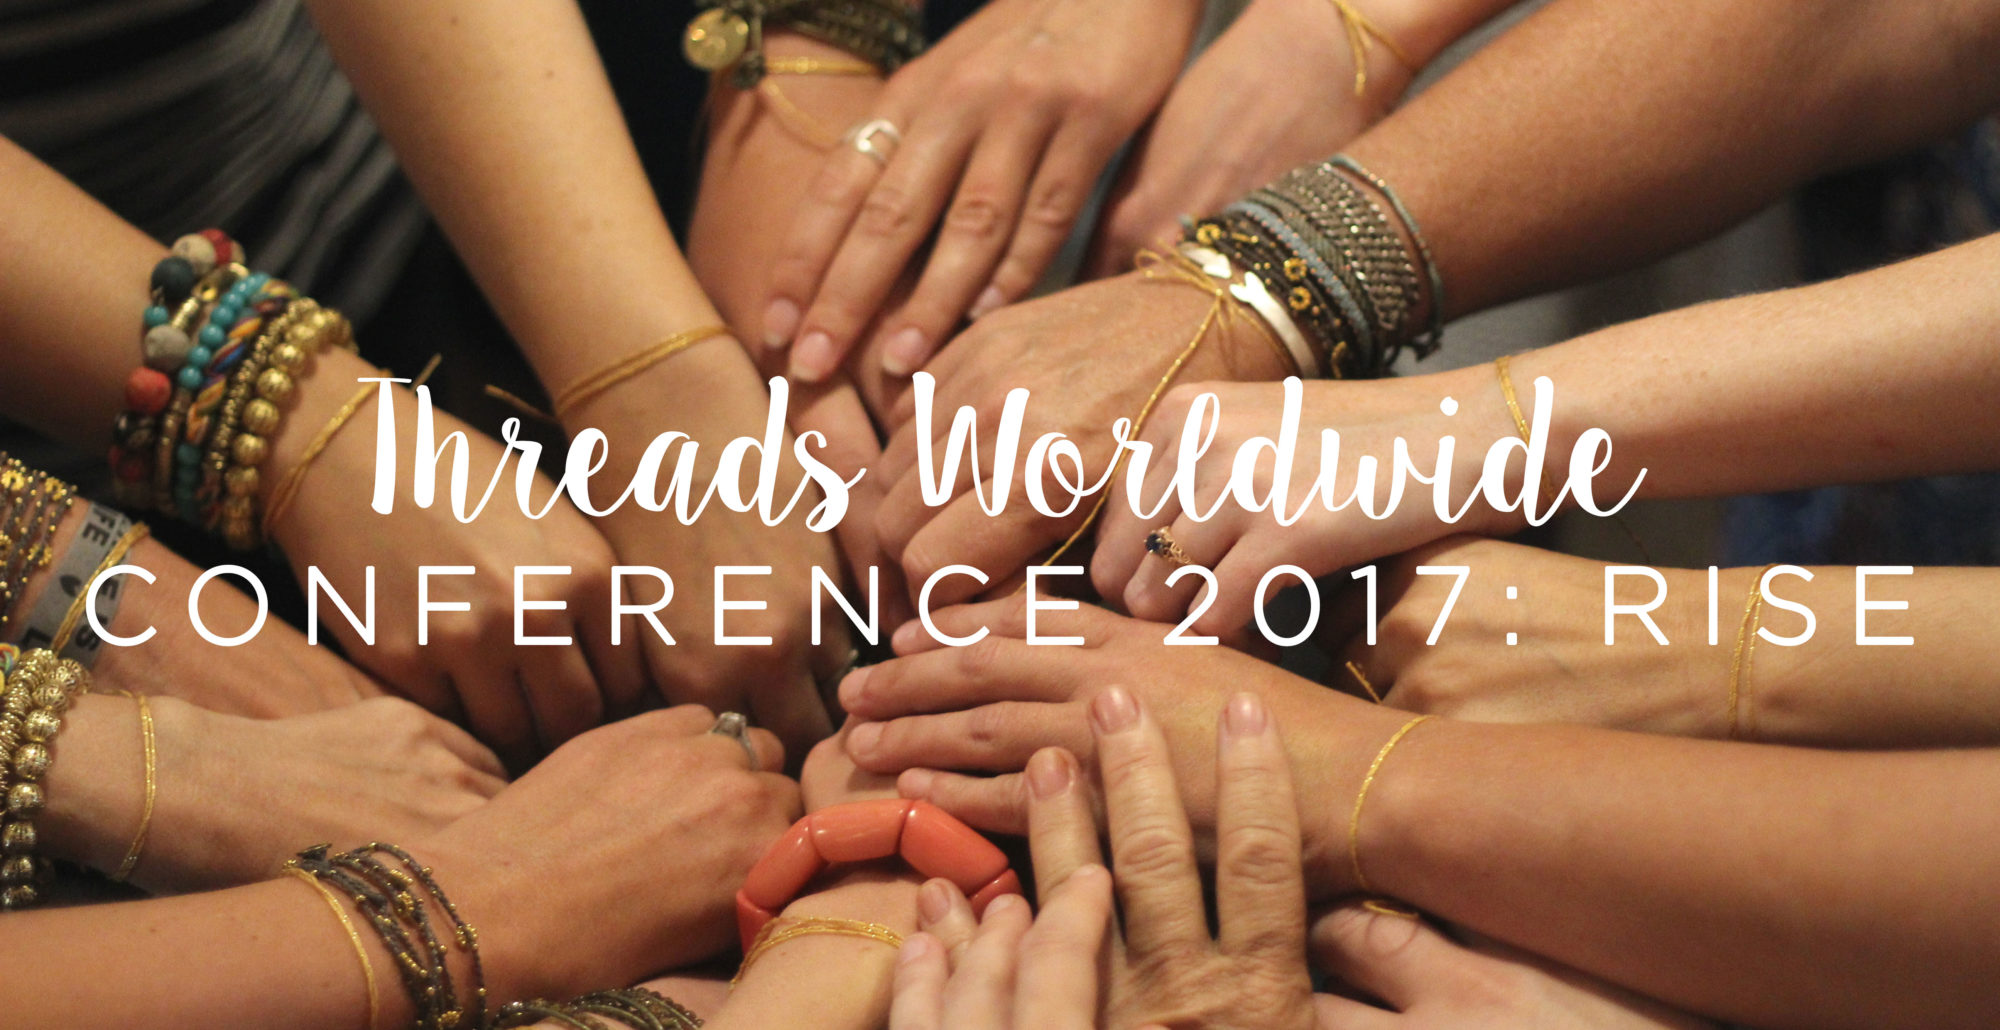 Threads Worldwide - RISE Fair Trade Partner Conference